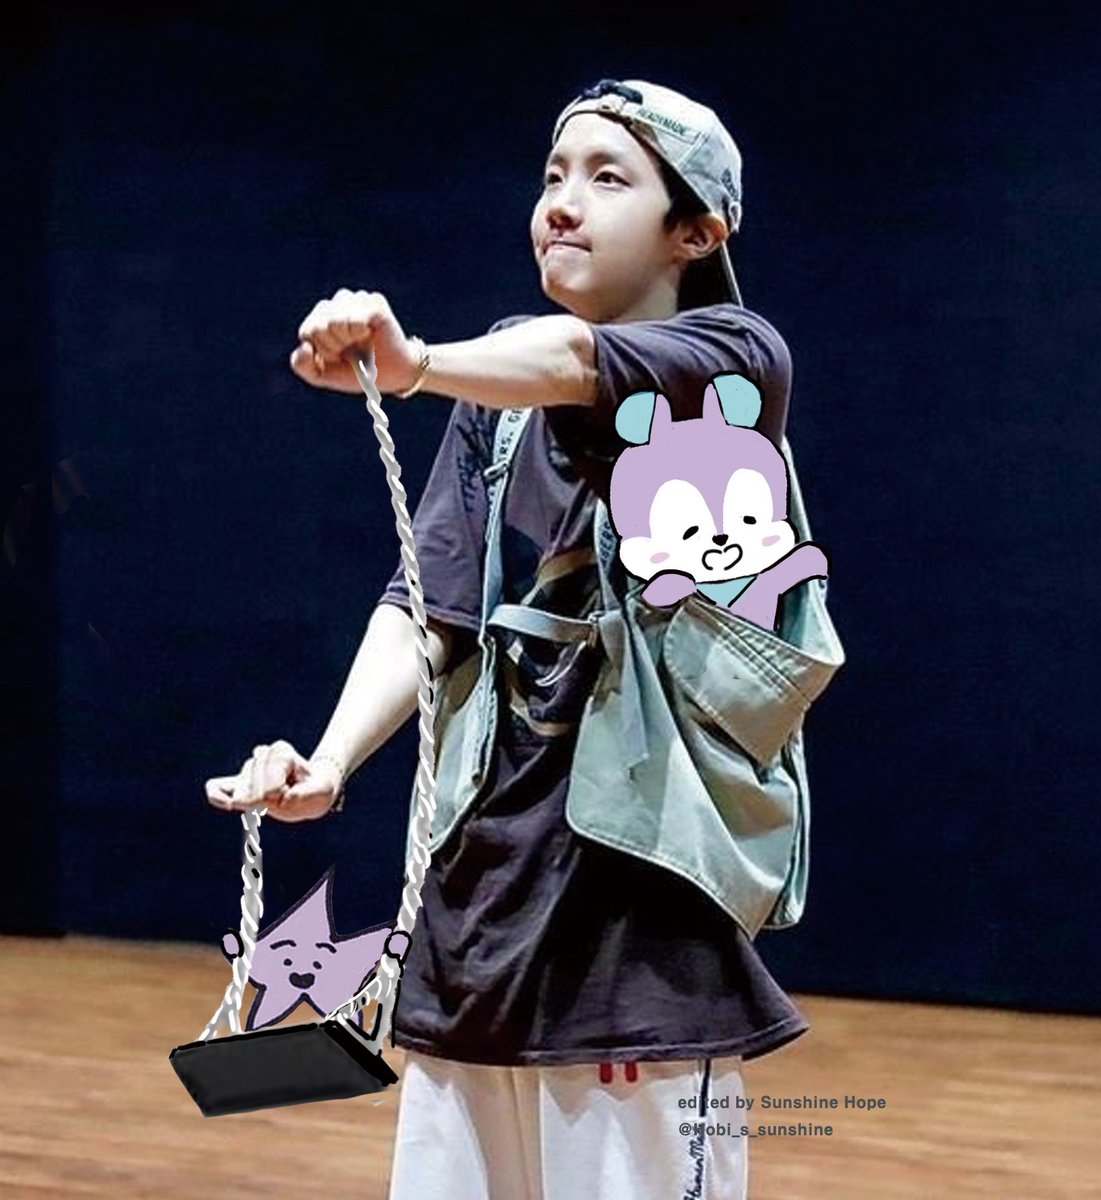 #jhope_NEURON #HOPE_ON_THE_STREET #jhope #제이홉
Parenting is not easy😉😉😉🤭